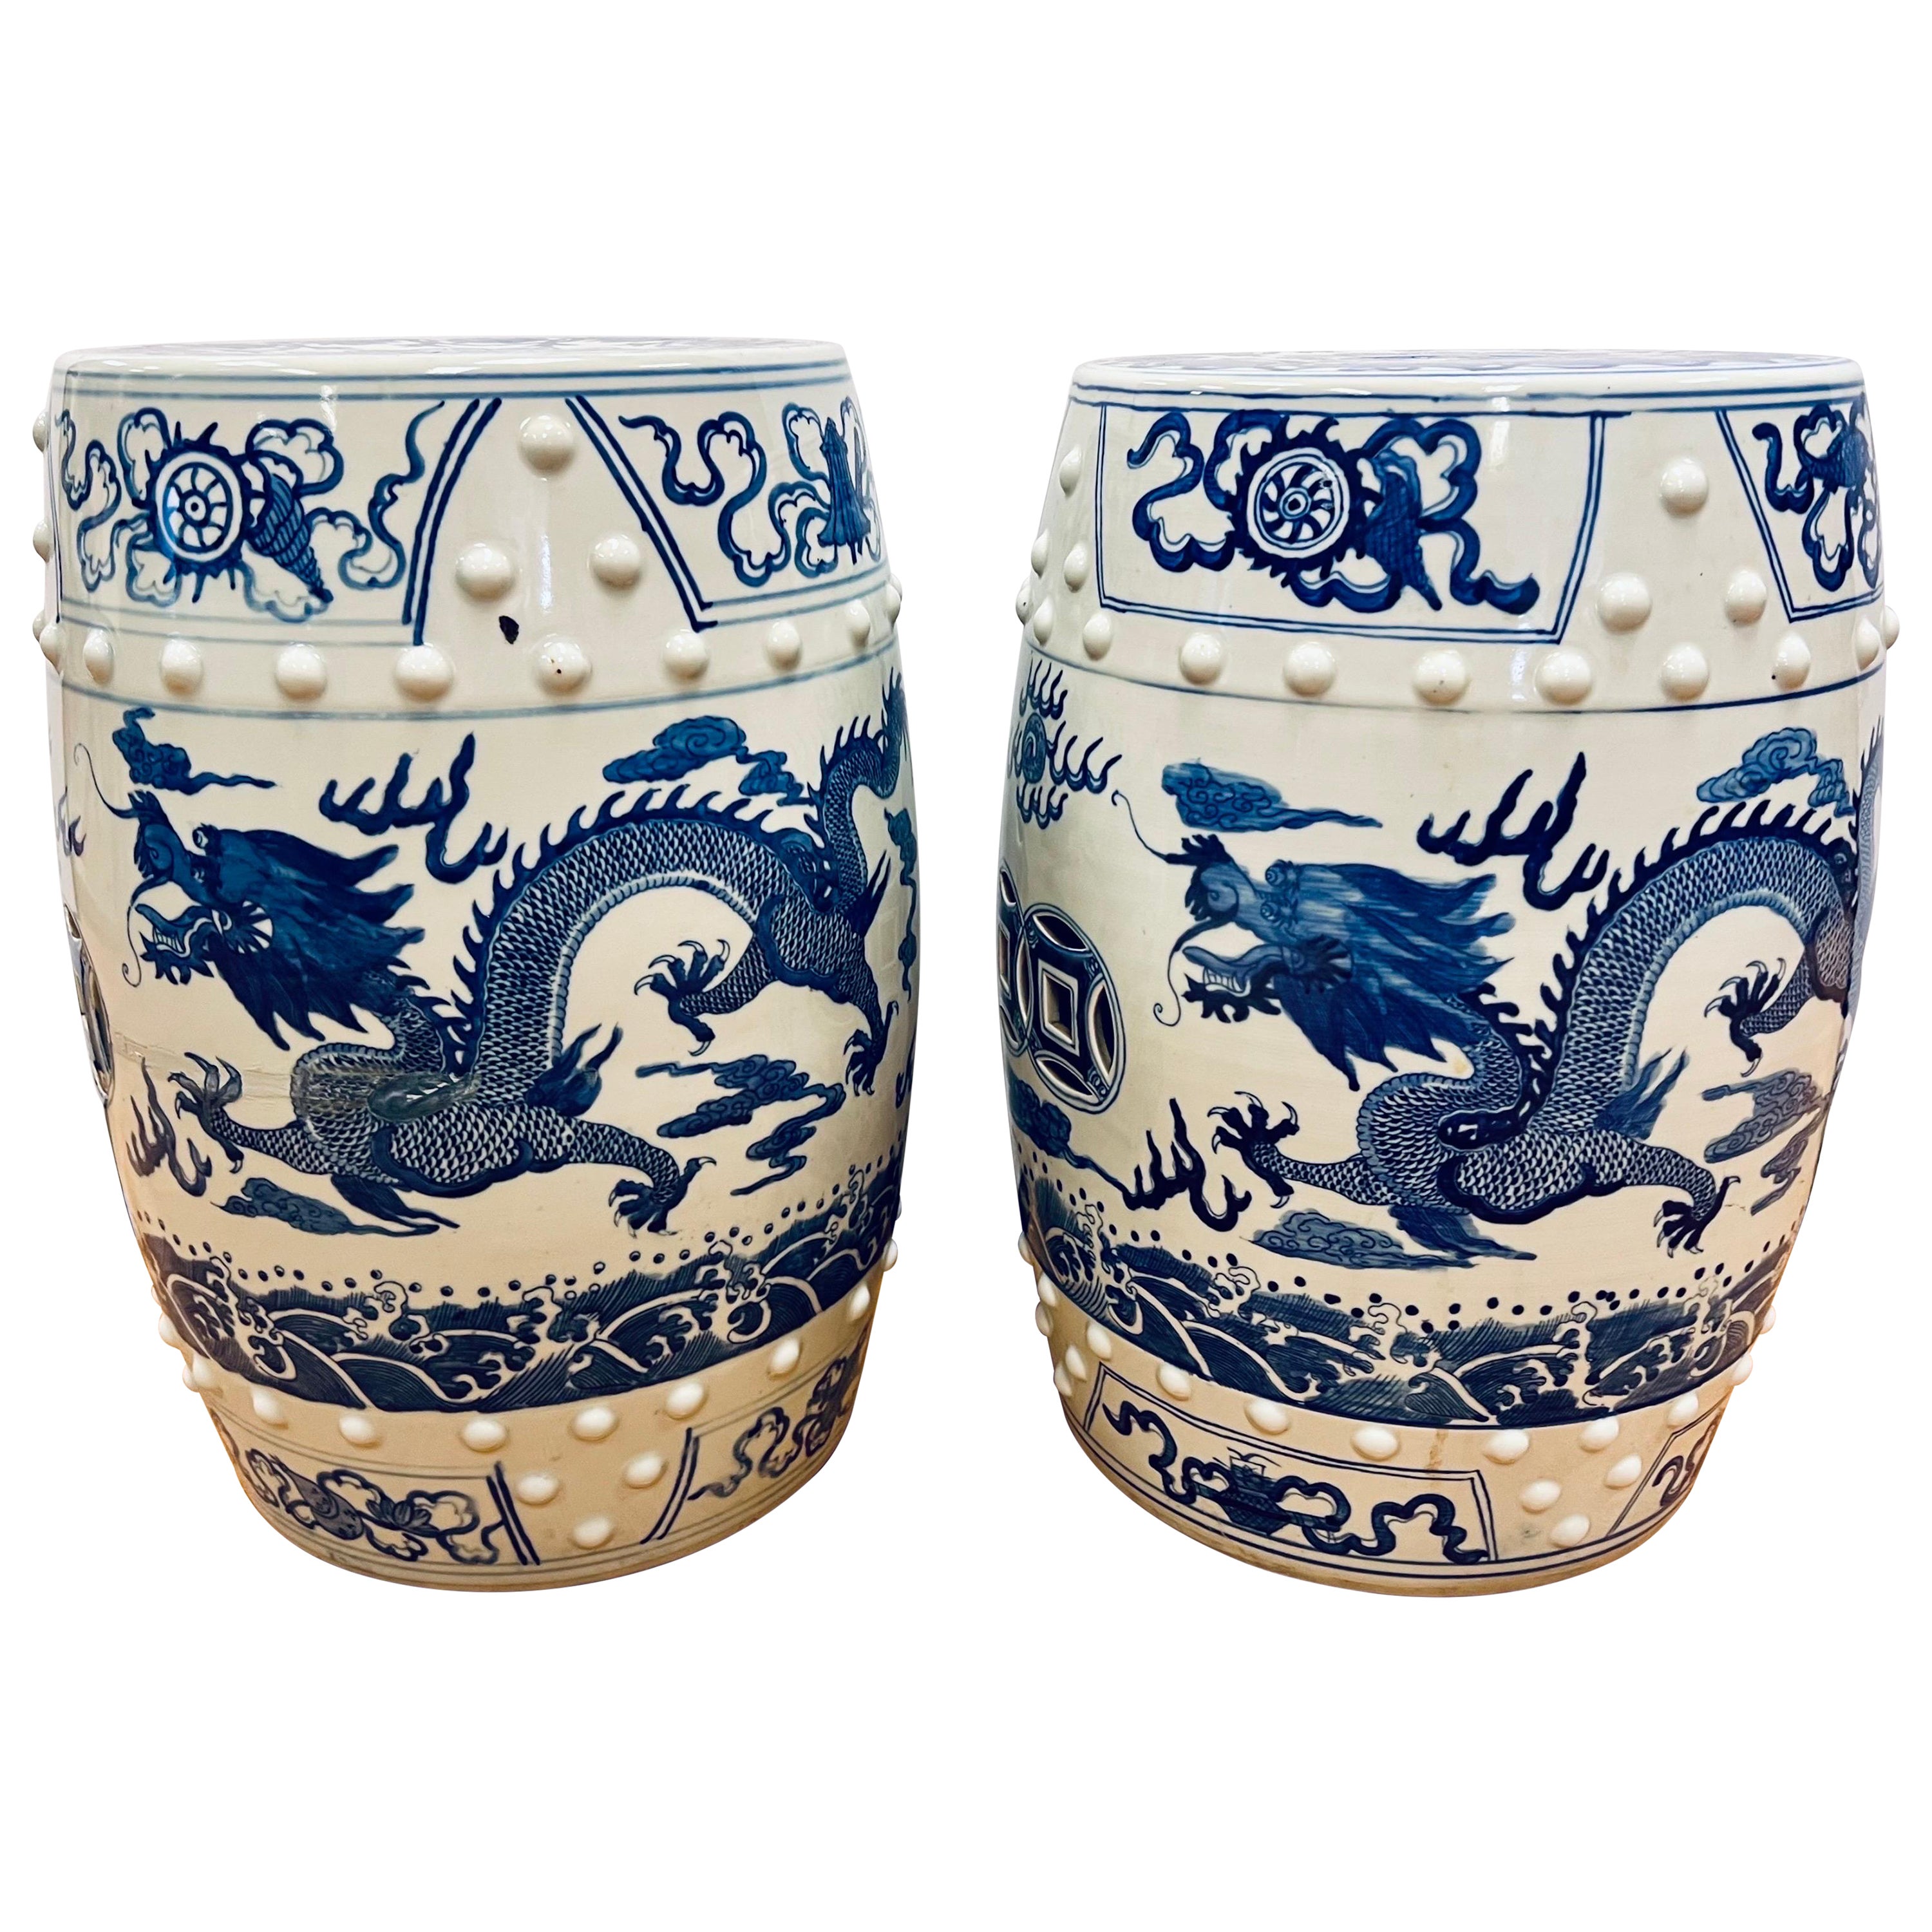 Blue and White Chinese Porcelain Garden Stools Side Tables with Dragons For Sale